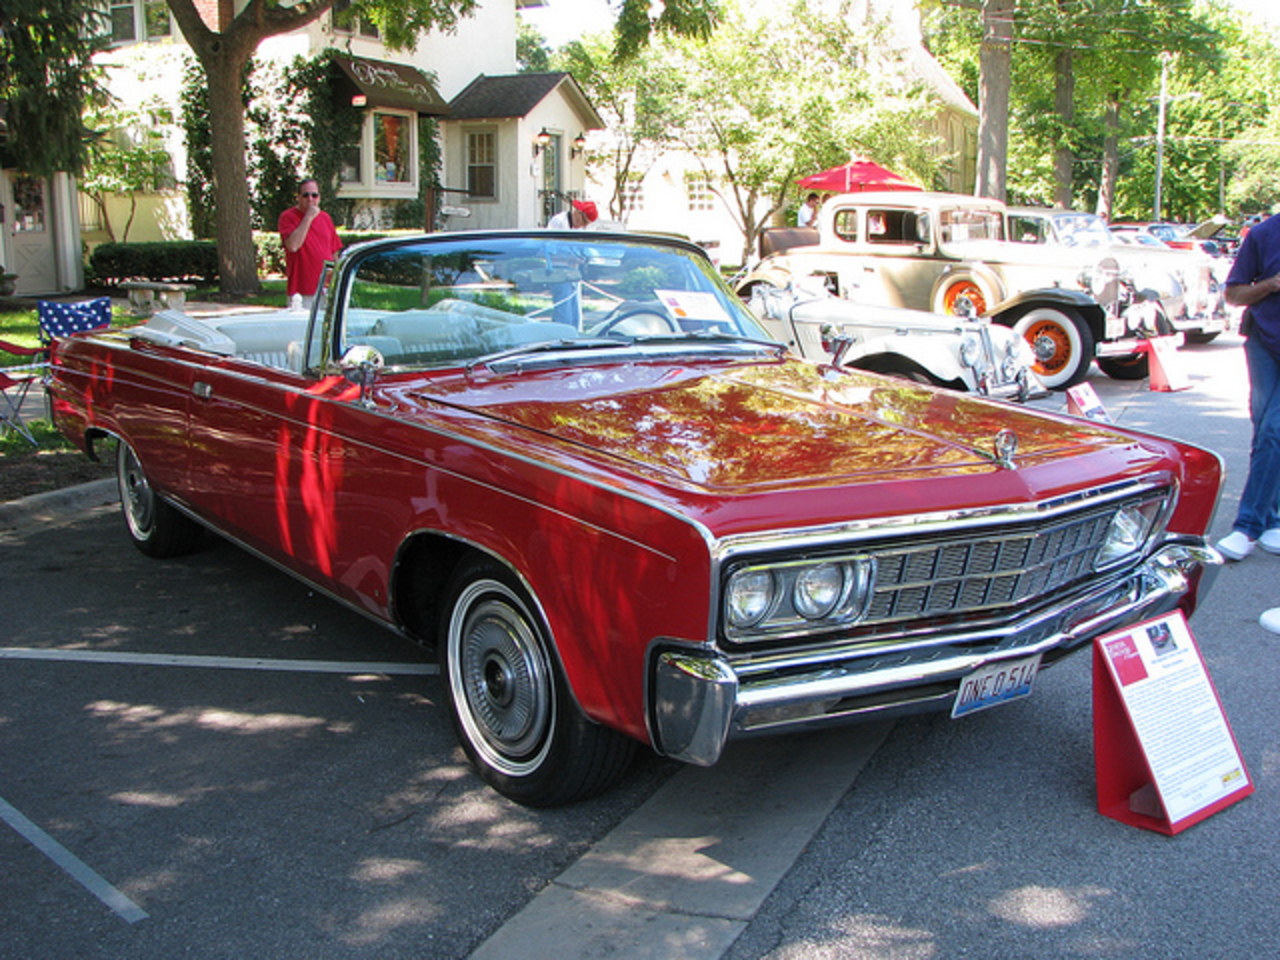 1966 Imperial Crown convertible | Flickr - Photo Sharing!